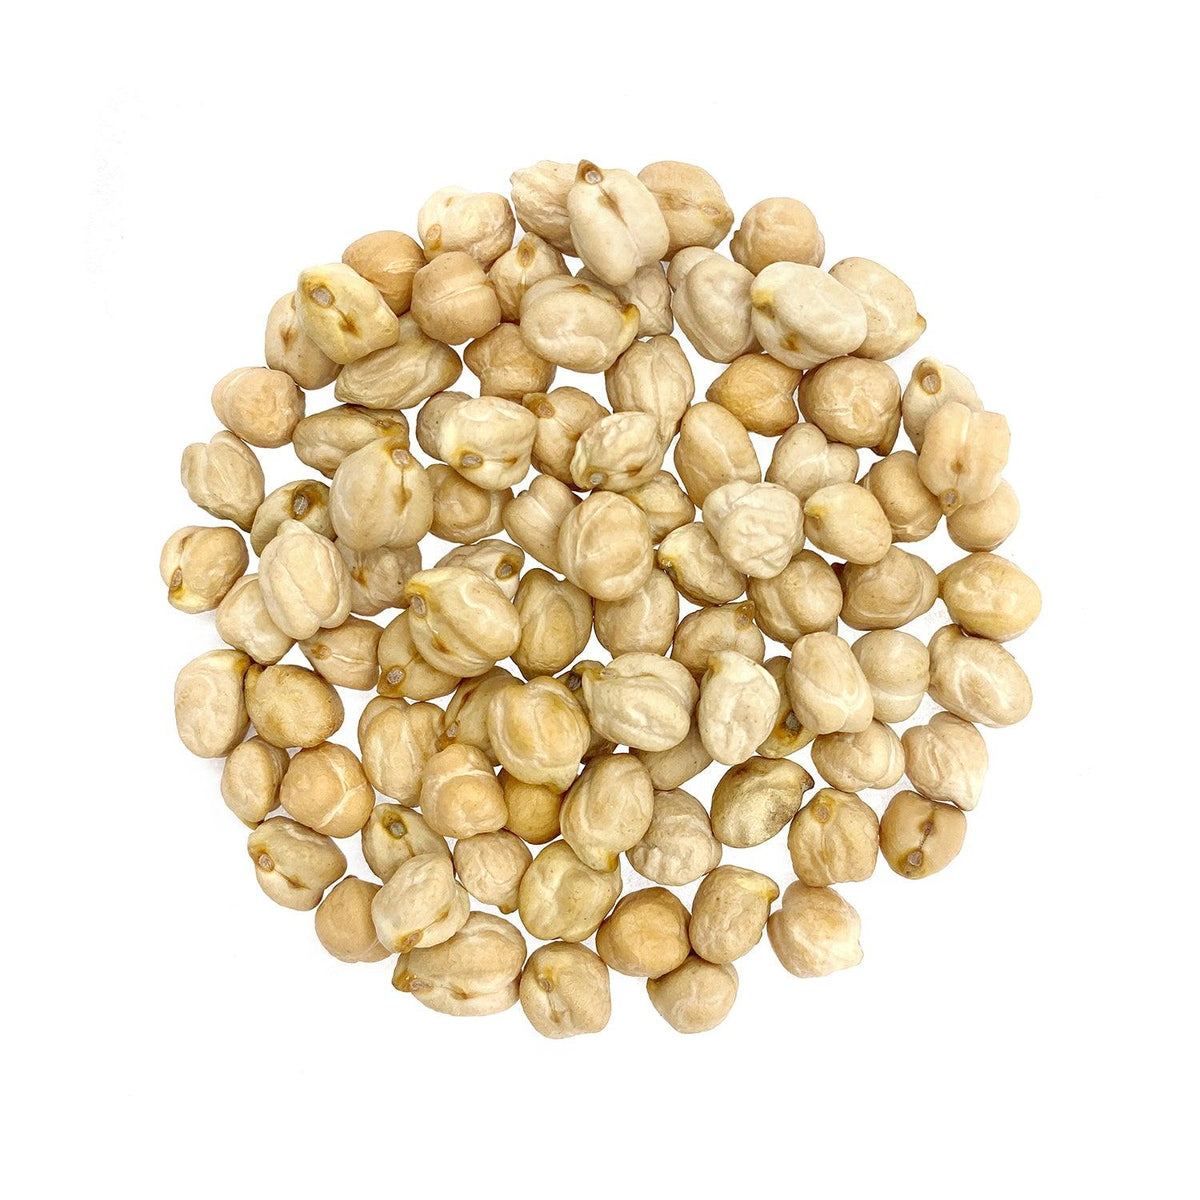 Kabuli Chana - Chickpeas 800g - Organic, Raw, Unpolished & Wholesome - Ethically Sourced without Preservatives - Satopradhan